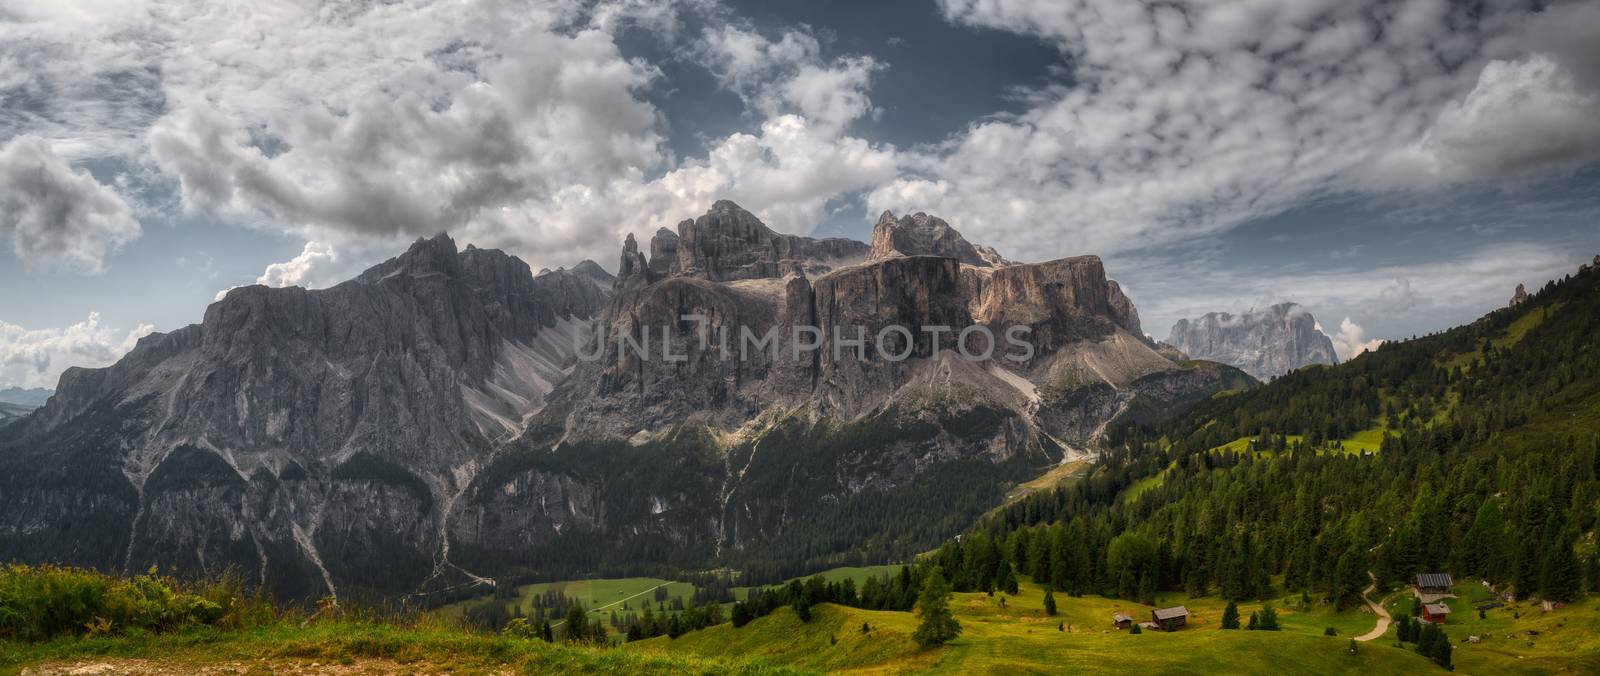 Group of Sella, Dolomites by Mdc1970